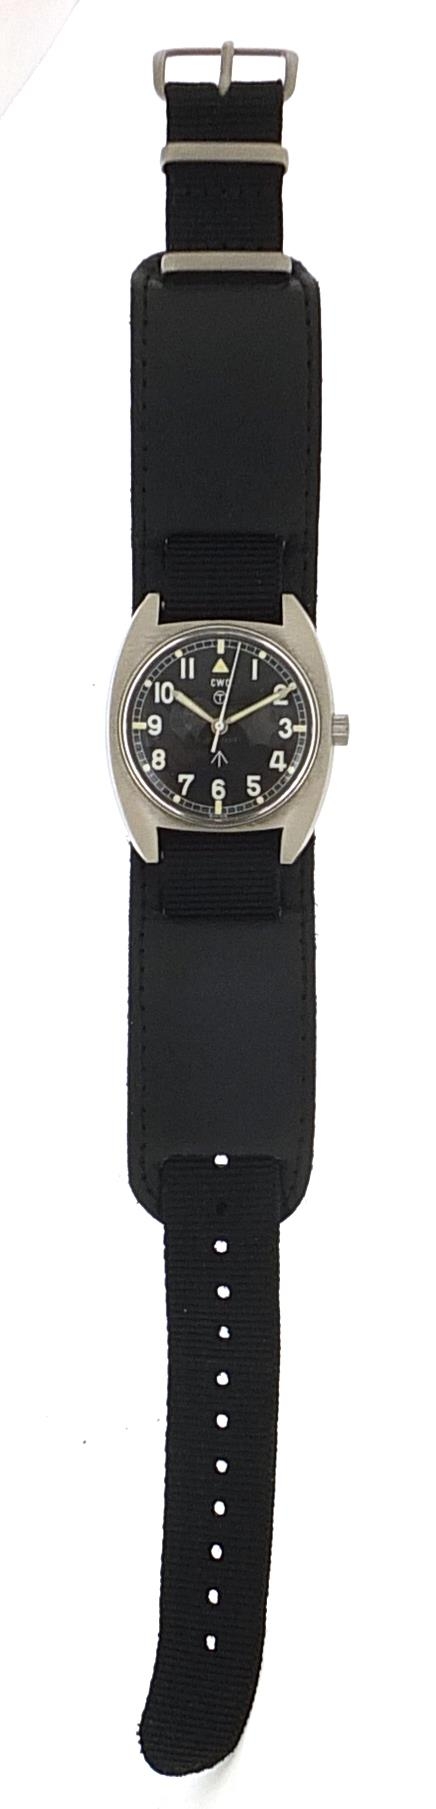 C W C, gentlemen's military issue wristwatch the case engraved 6BB-6645-99 523-6290 1677/79, the - Image 2 of 4